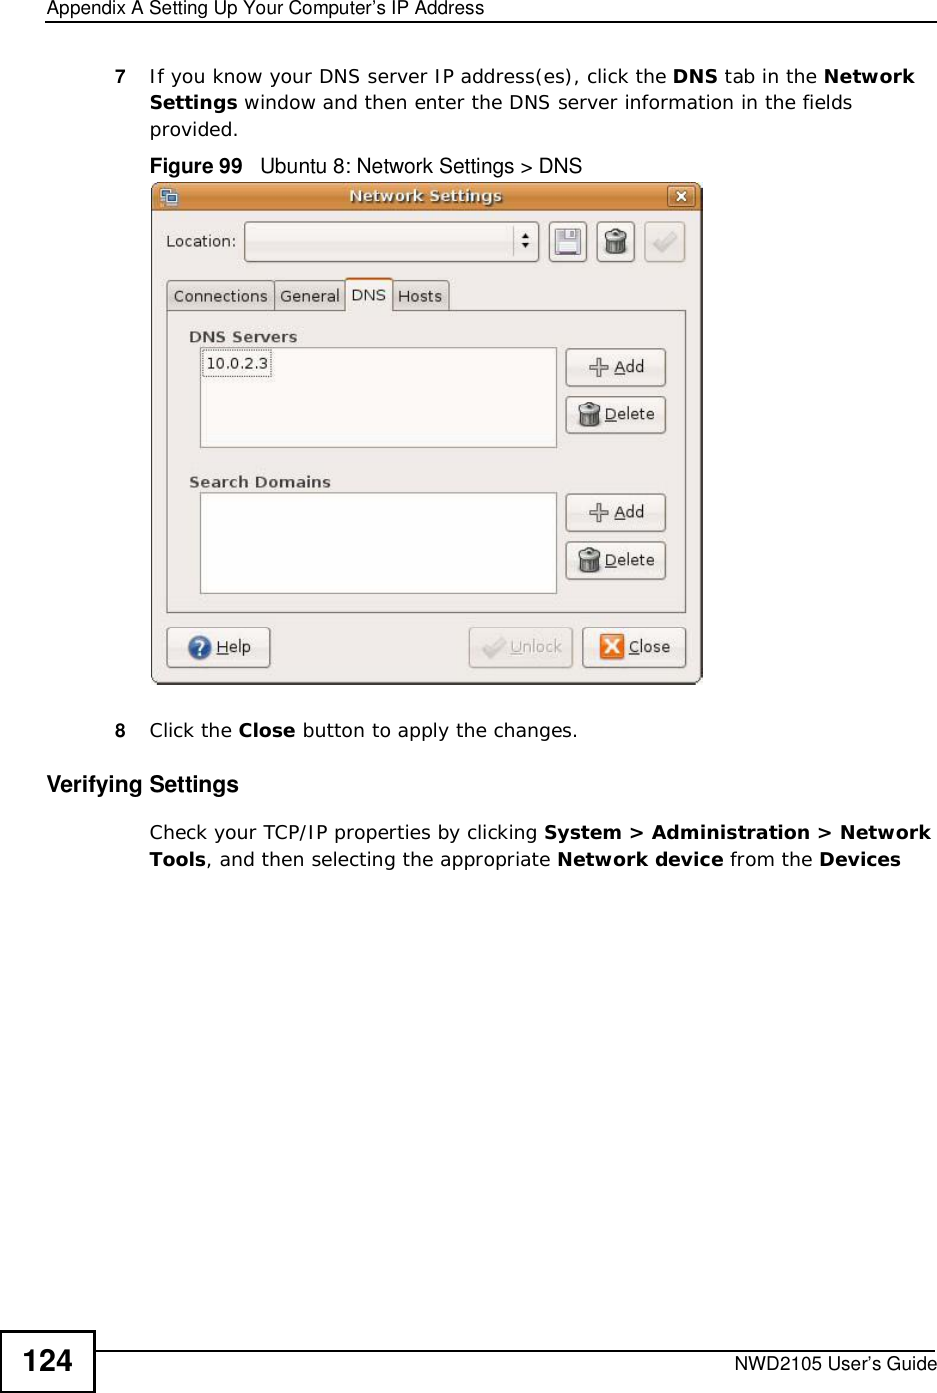 Appendix ASetting Up Your Computer’s IP AddressNWD2105 User’s Guide1247If you know your DNS server IP address(es), click the DNS tab in the Network Settings window and then enter the DNS server information in the fields provided. Figure 99   Ubuntu 8: Network Settings &gt; DNS  8Click the Close button to apply the changes.Verifying SettingsCheck your TCP/IP properties by clicking System &gt; Administration &gt; Network Tools, and then selecting the appropriate Network device from the Devices